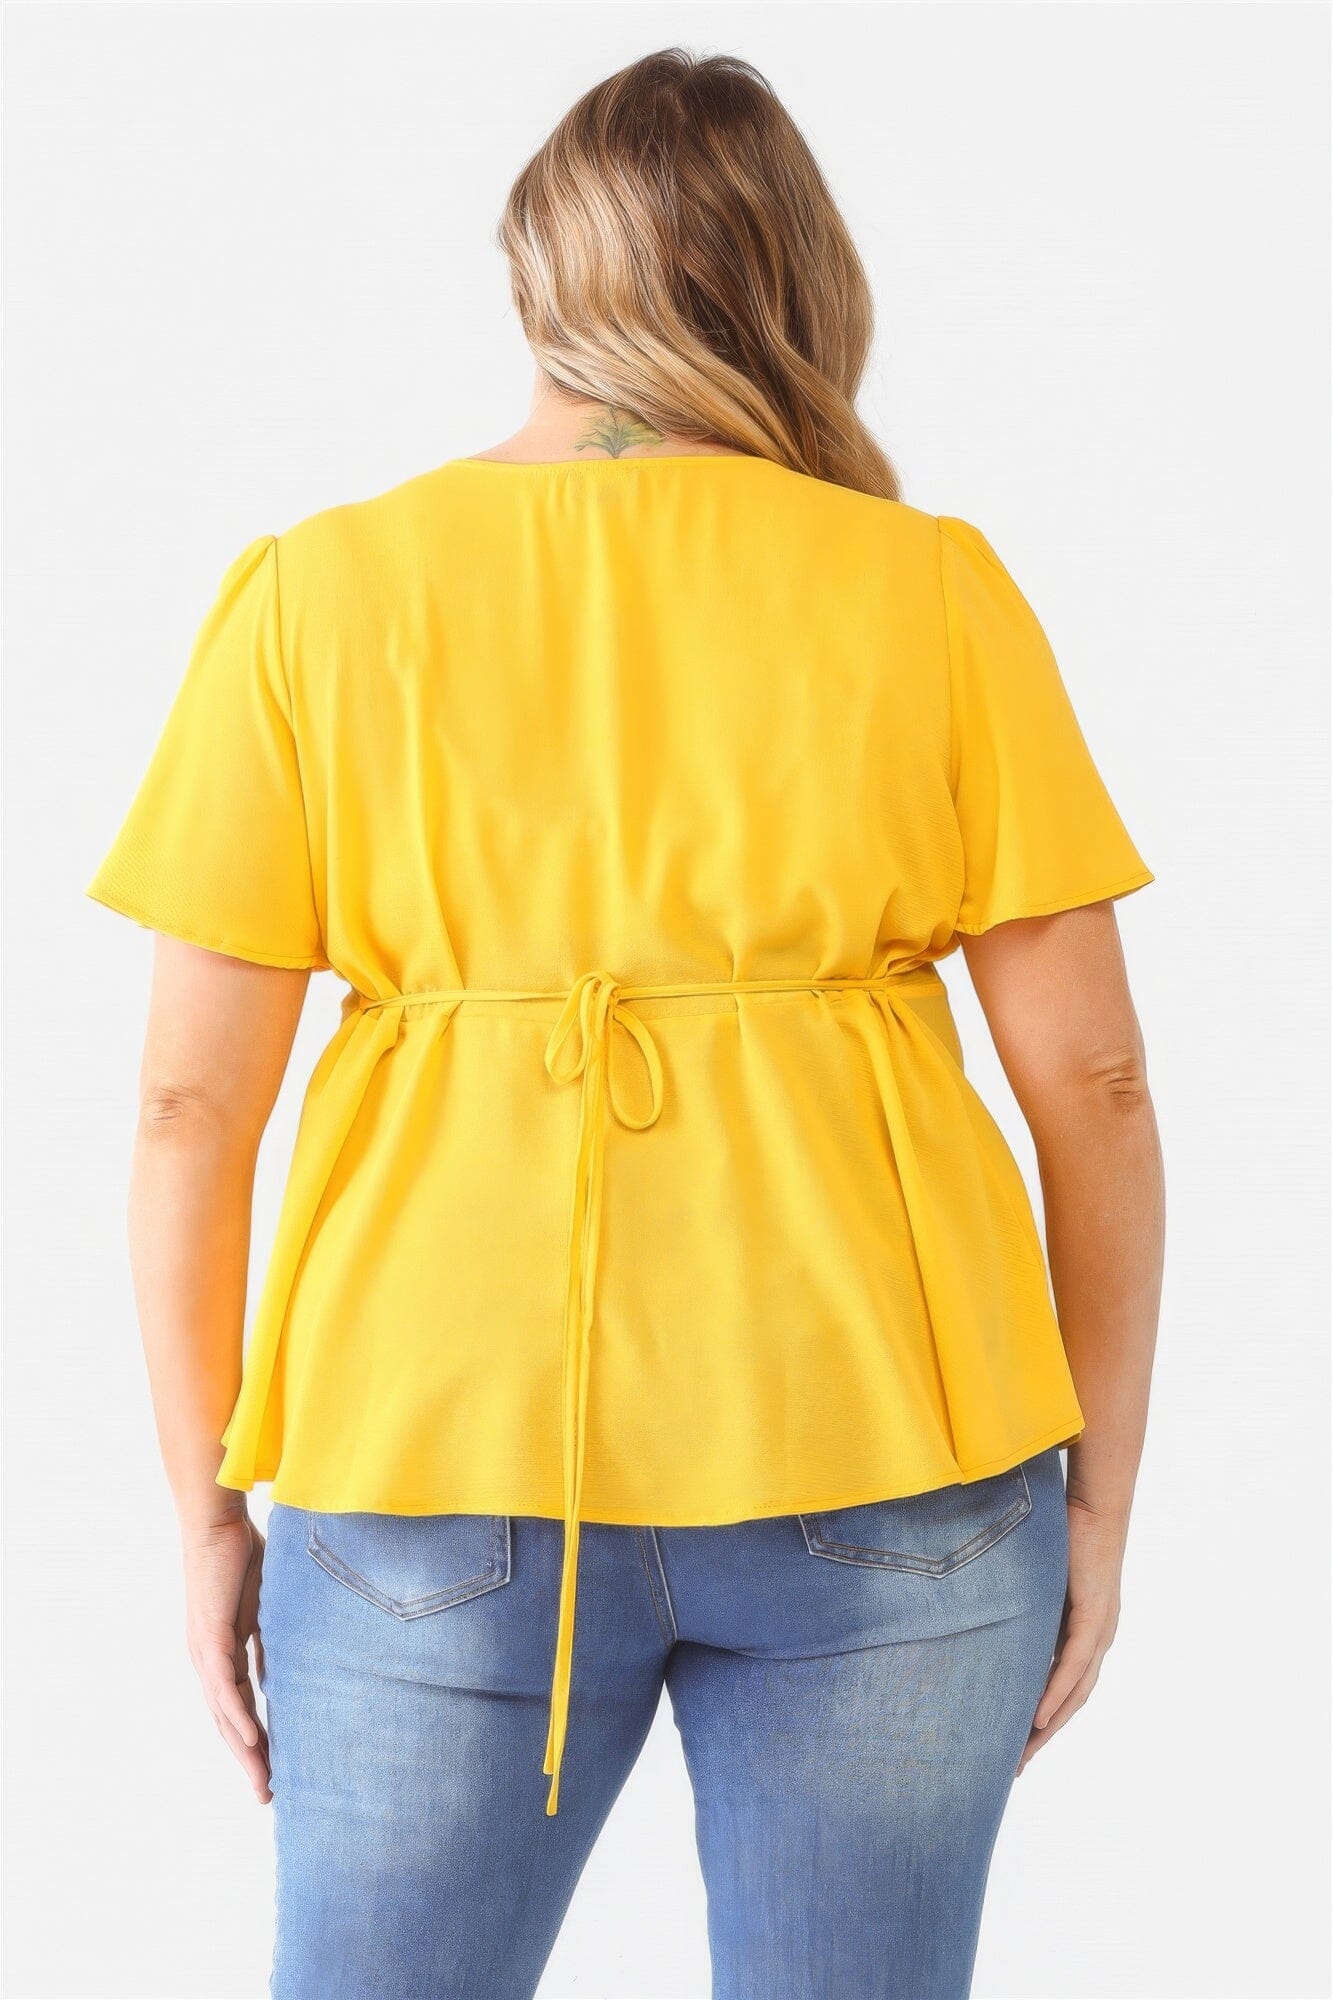 Yellow Plus Size Button Up V Neck Short Sleeve Flare Top Shirts & Tops jehouze 